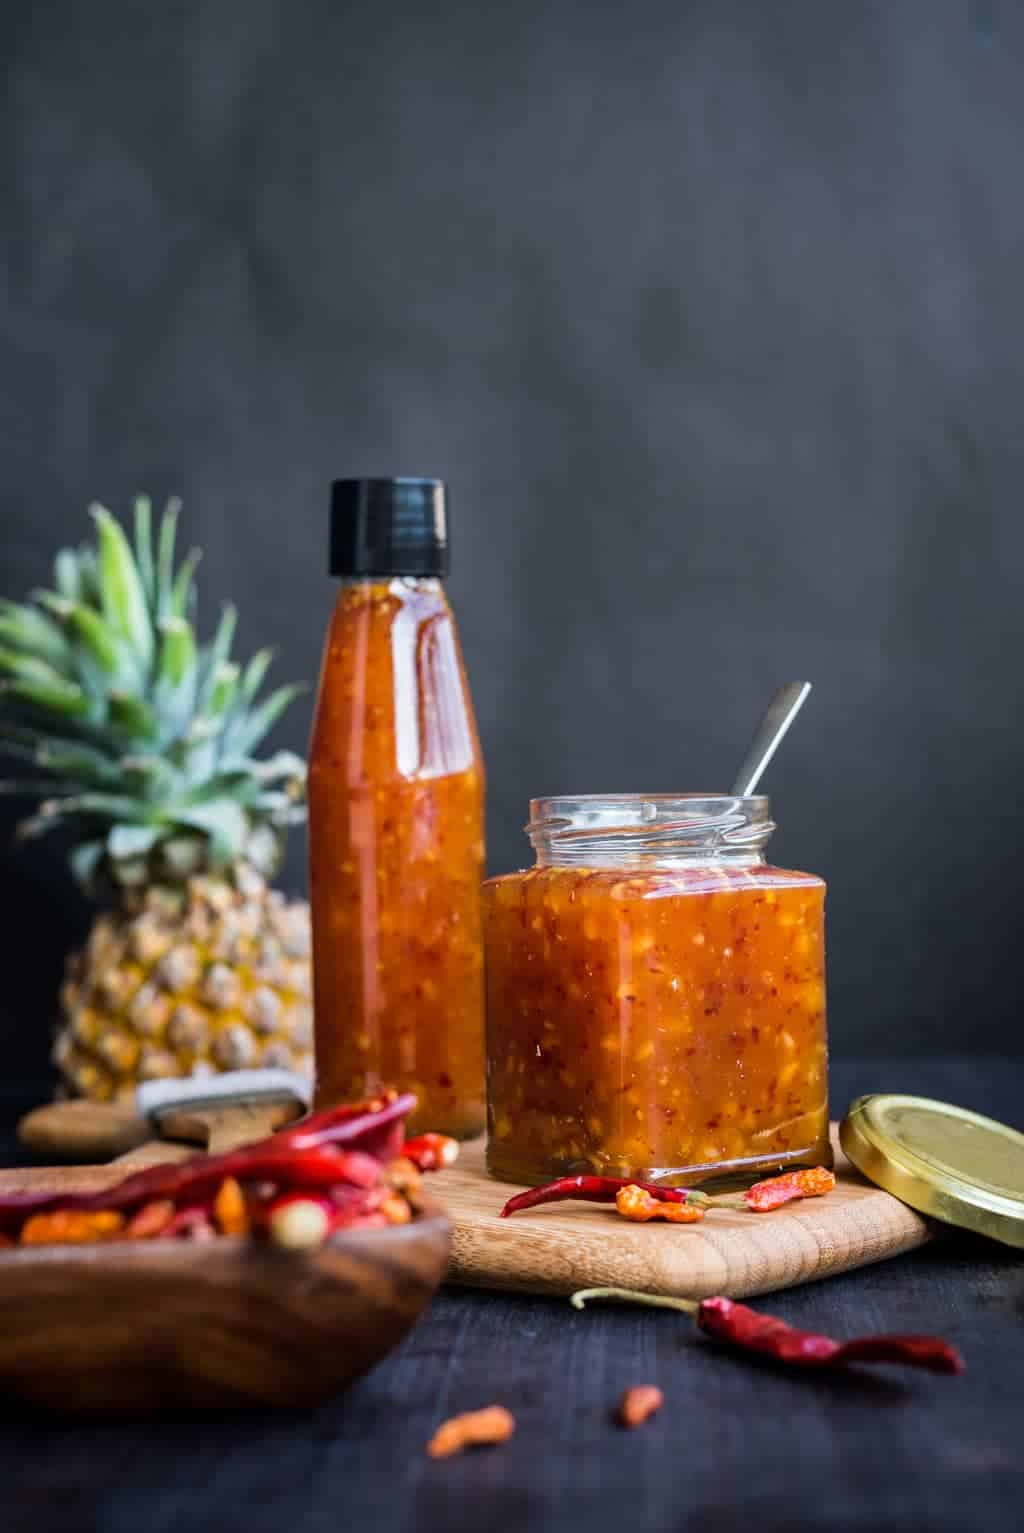 Jarful of sweet chili Pineapple sauce made with basic ingredients